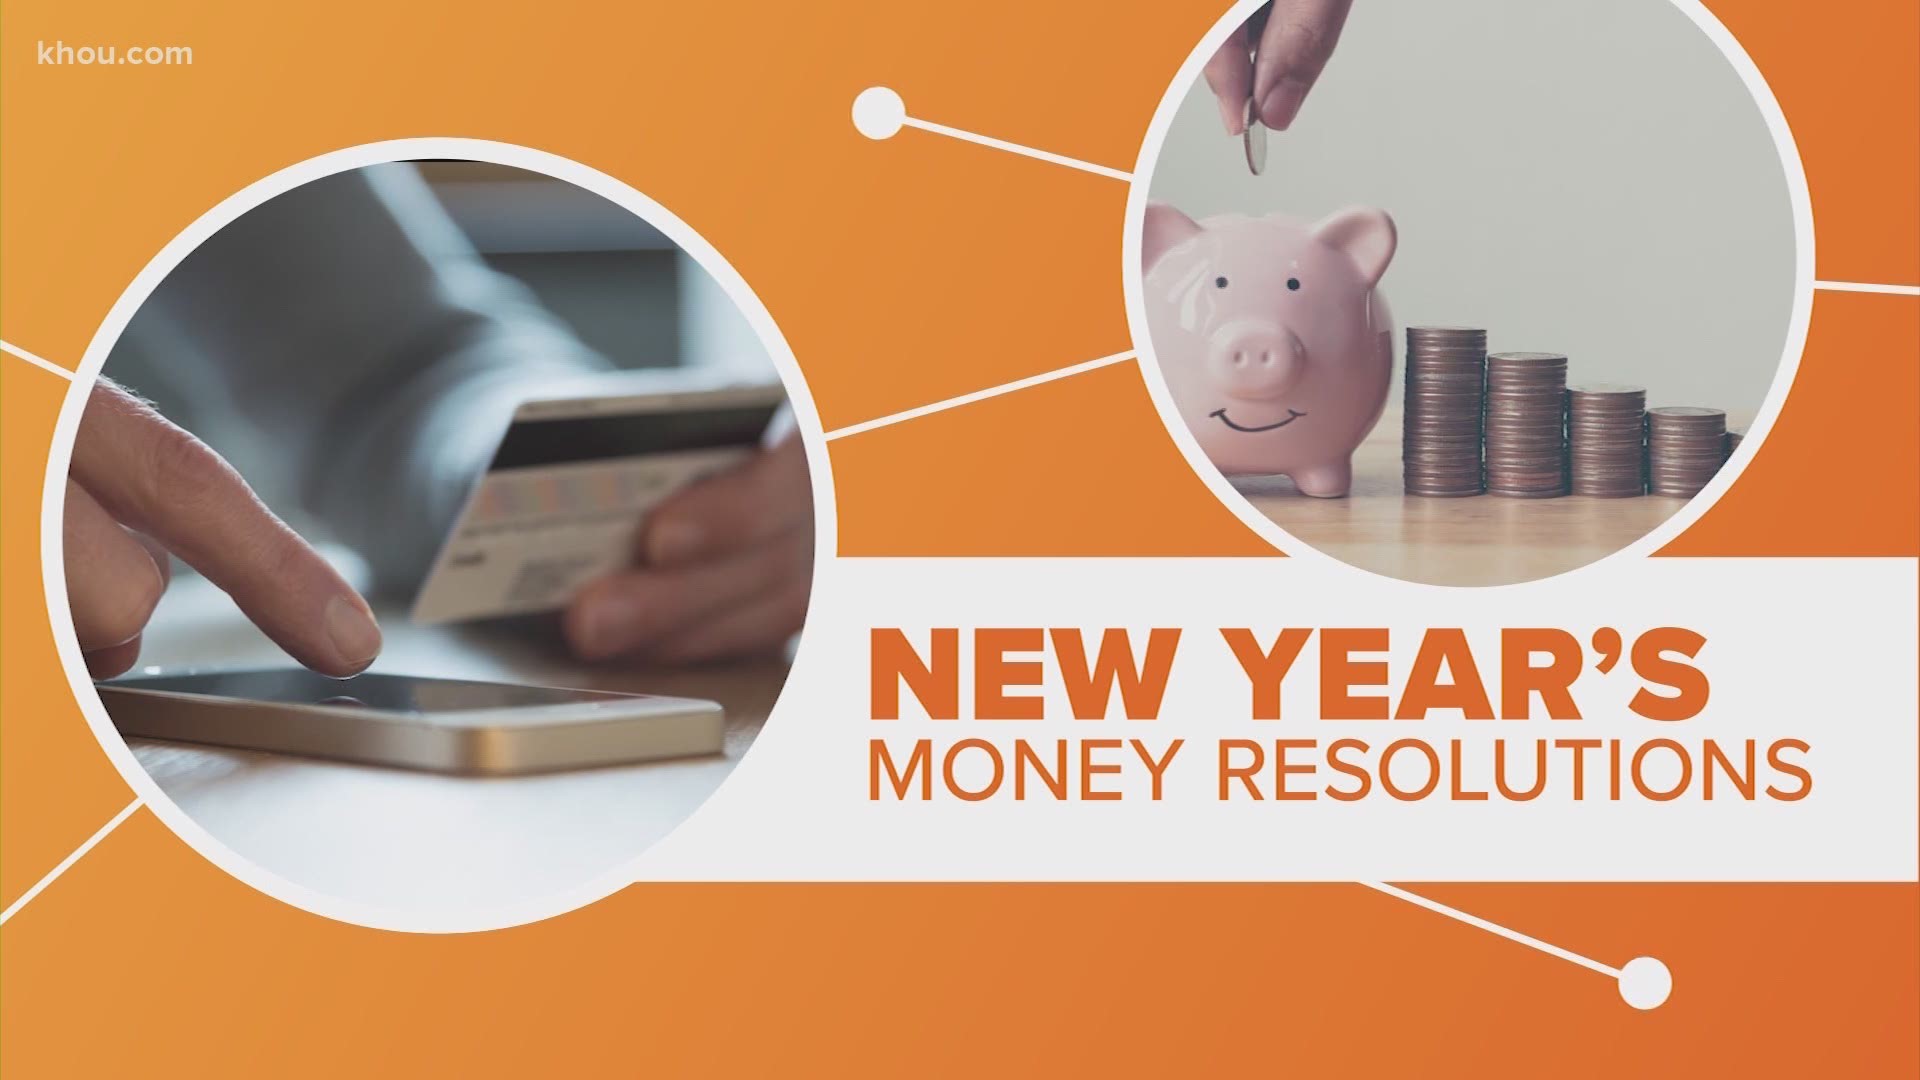 First, when it comes to your savings, financial experts say you should tackle putting money aside before your other resolutions.